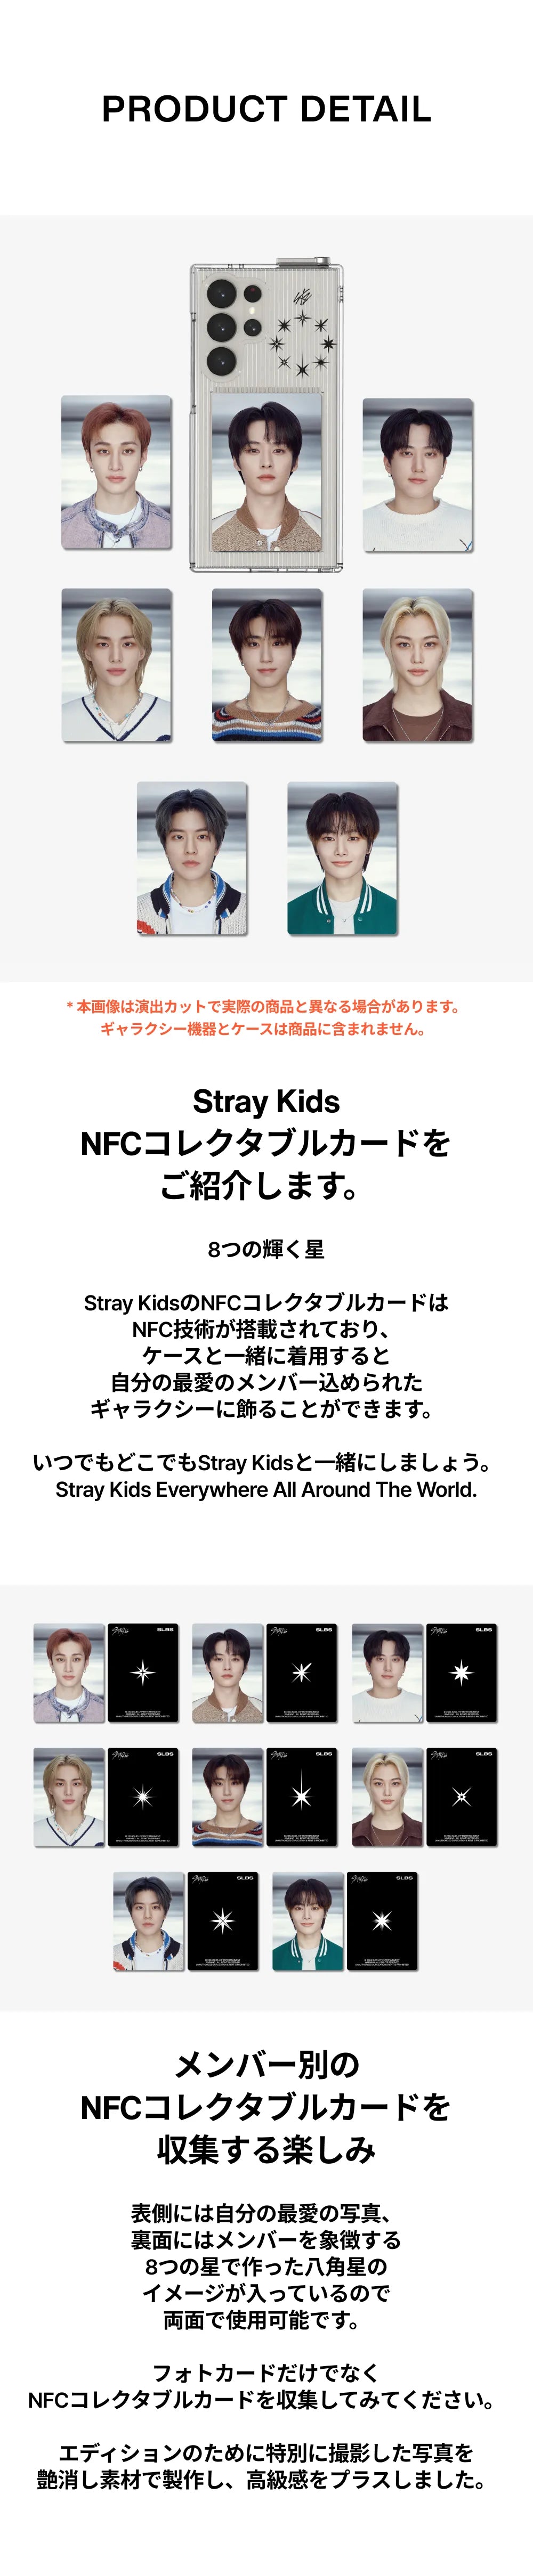 StrayKids NFC Collectable Card_LEE KNOW